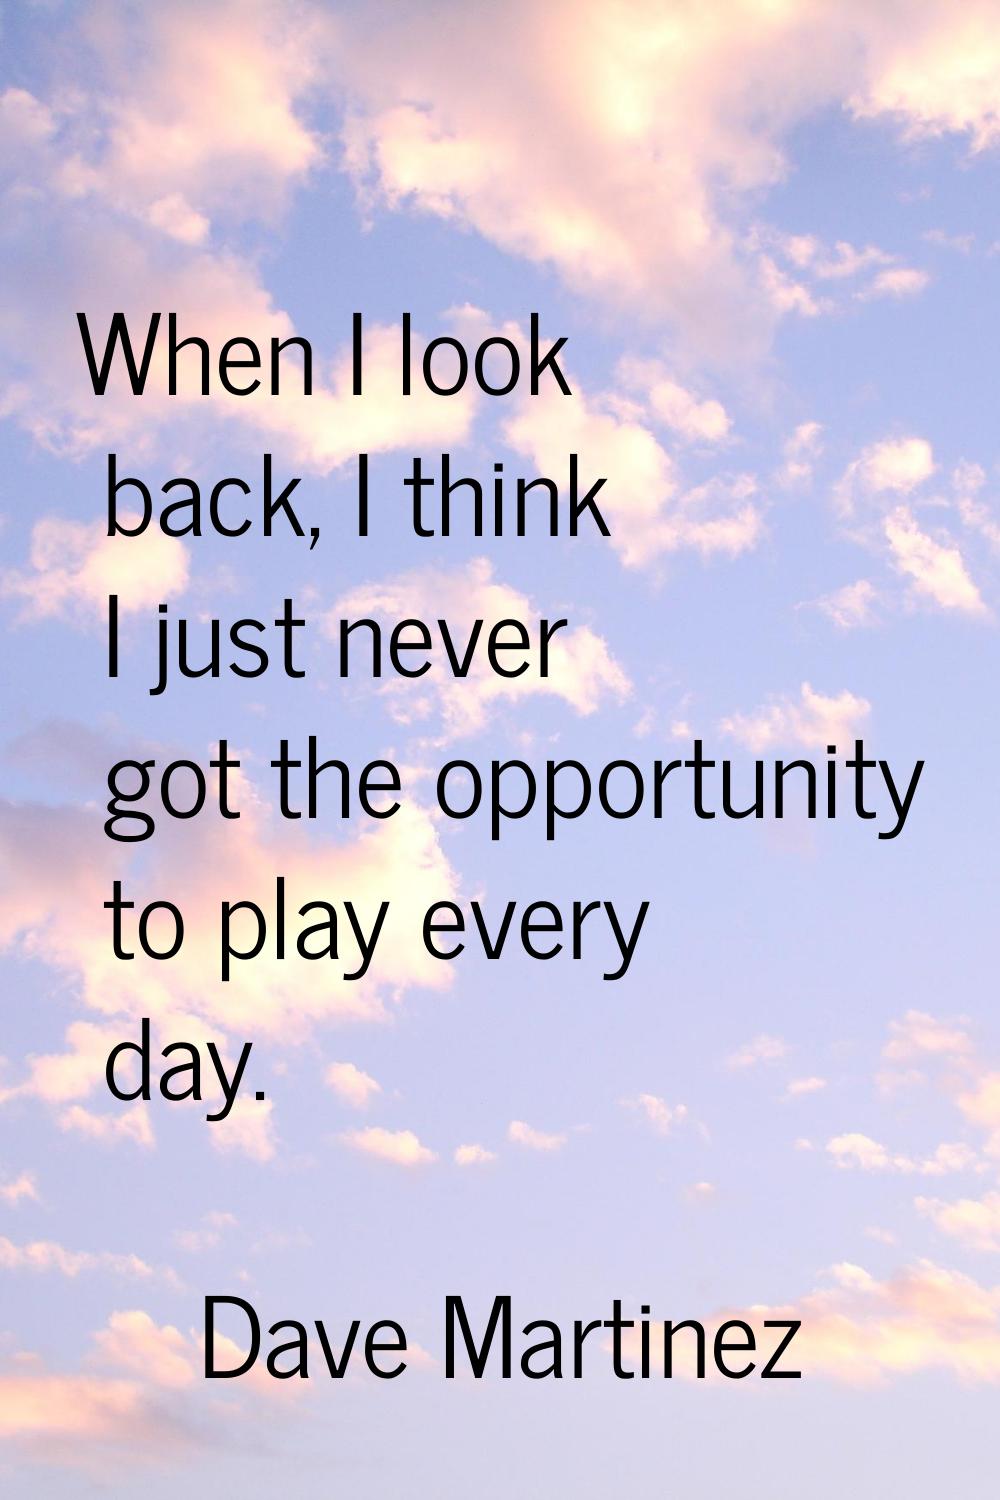 When I look back, I think I just never got the opportunity to play every day.